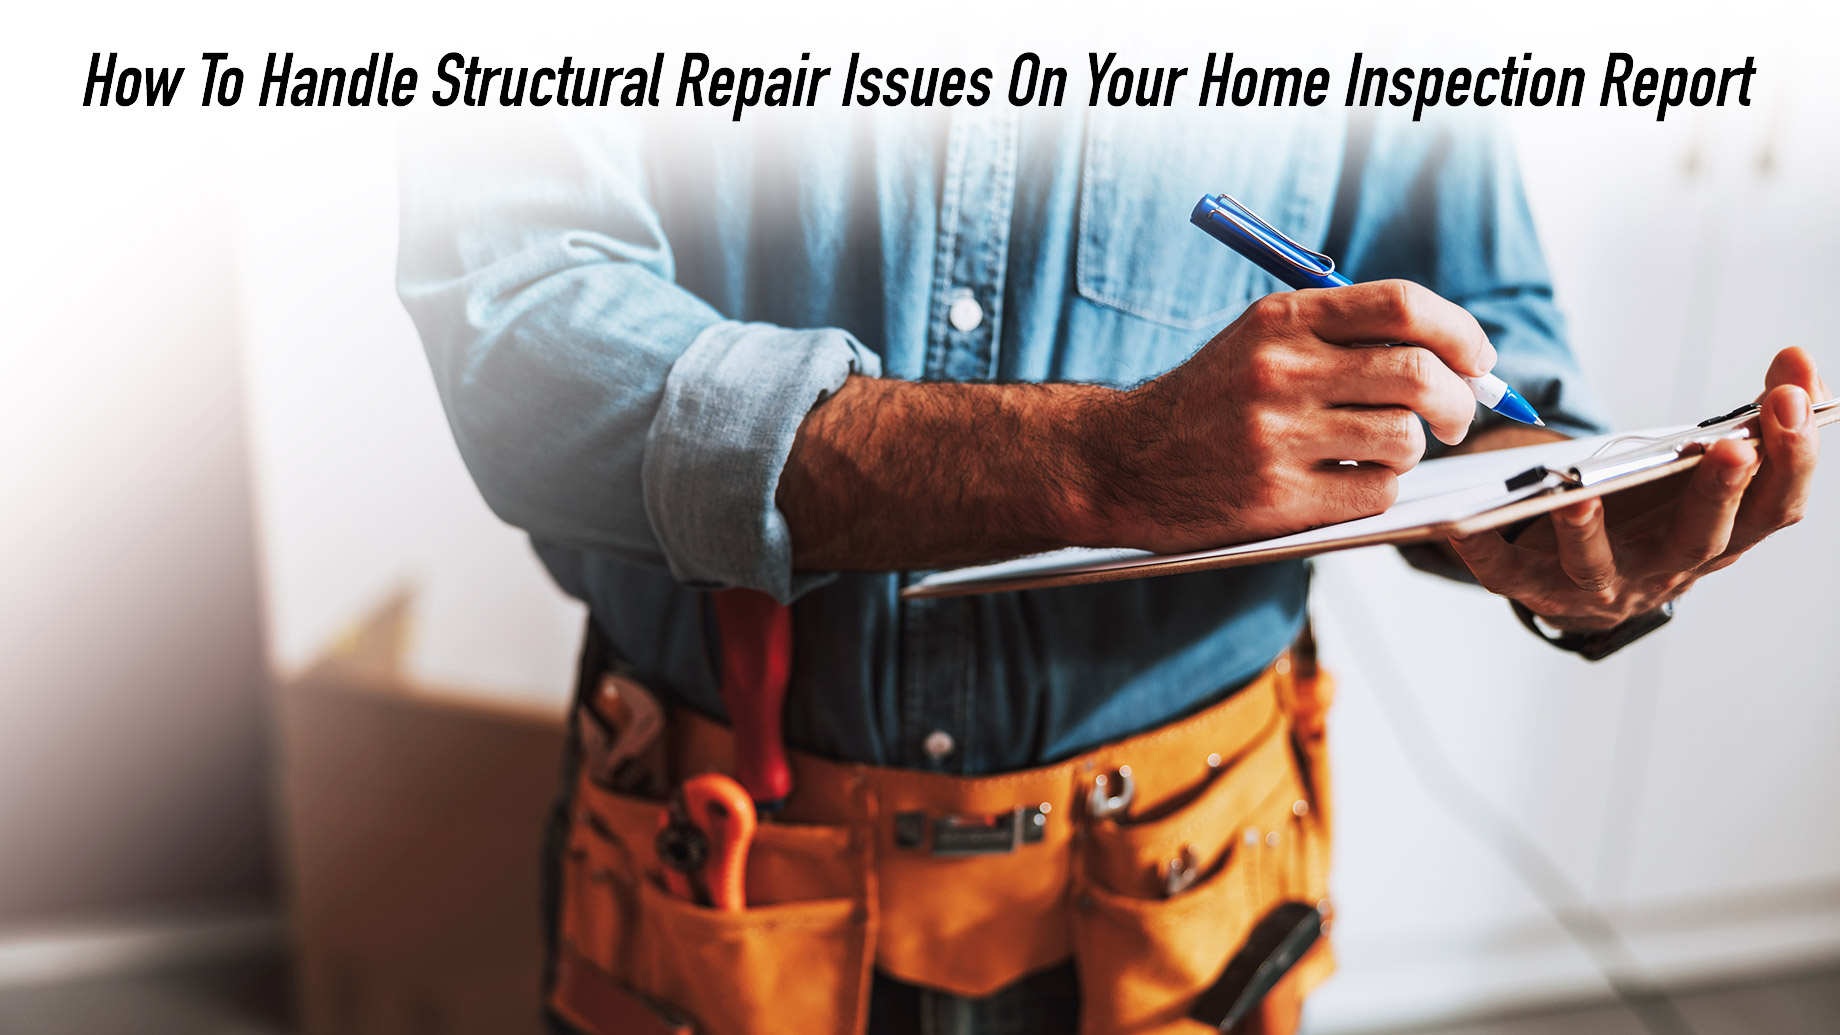 How To Handle Structural Repair Issues On Your Home Inspection Report